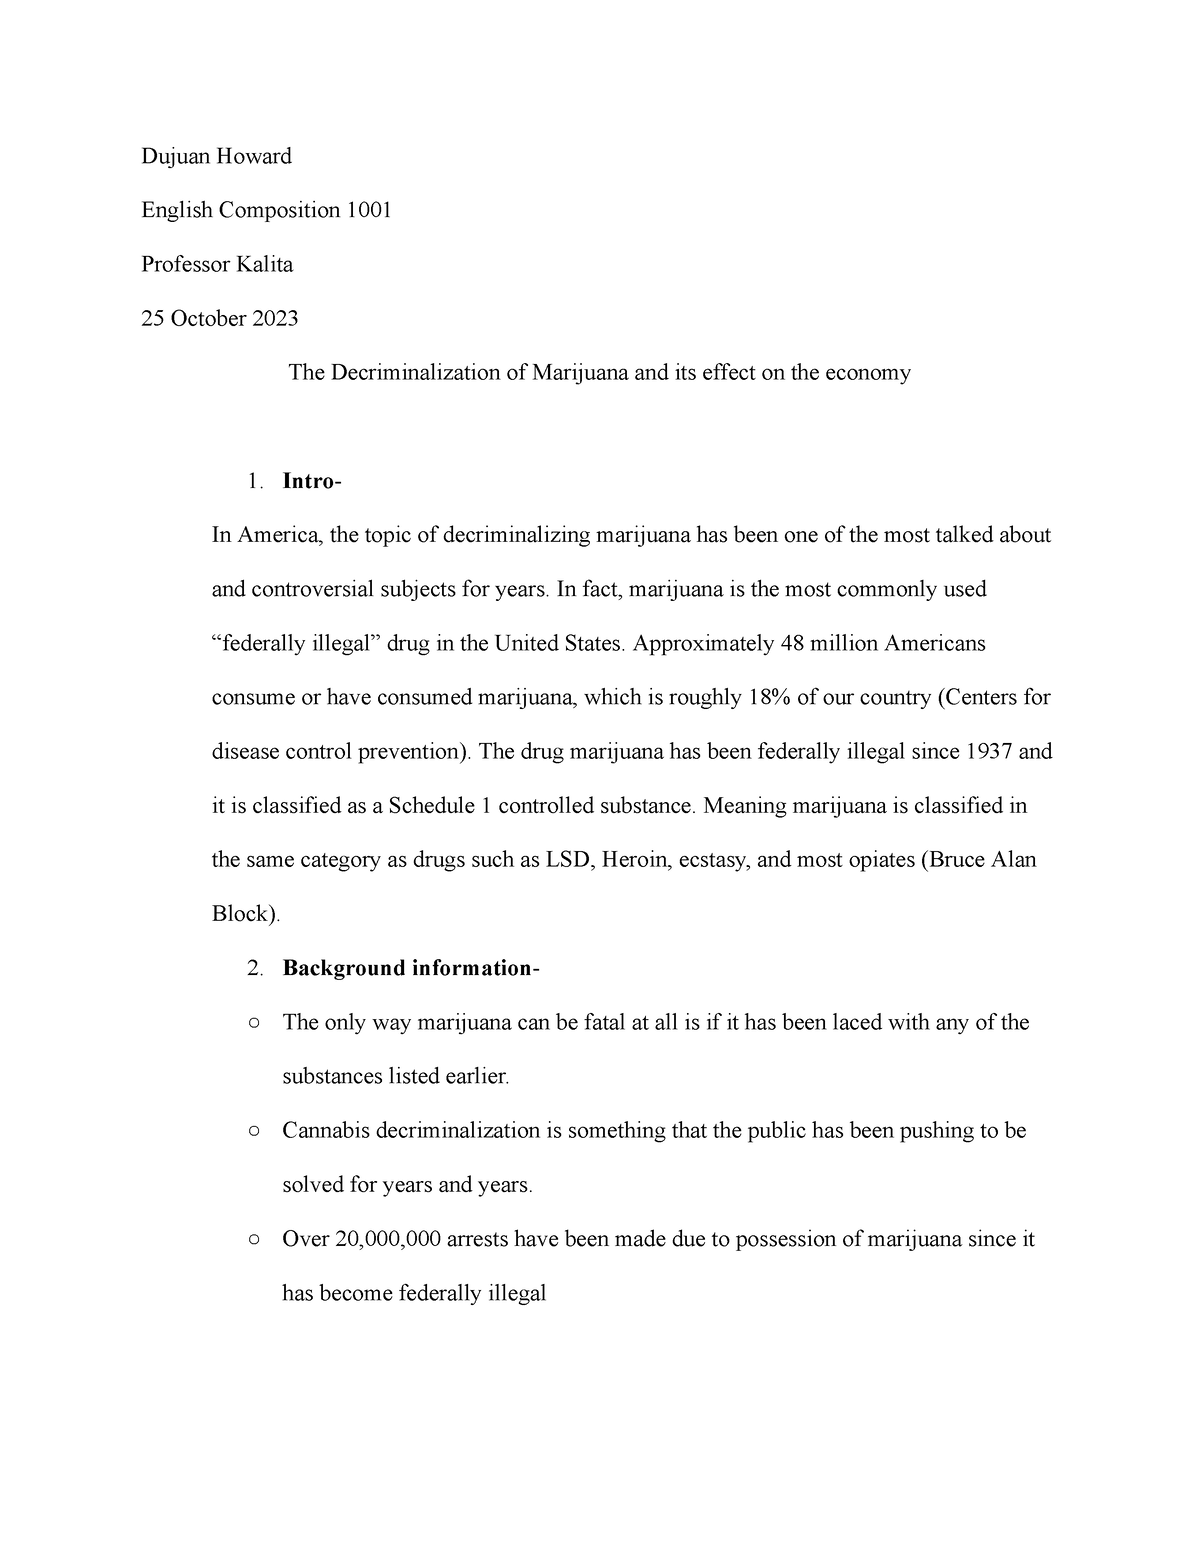 Research essay outline - Dujuan Howard English Composition 1001 ...